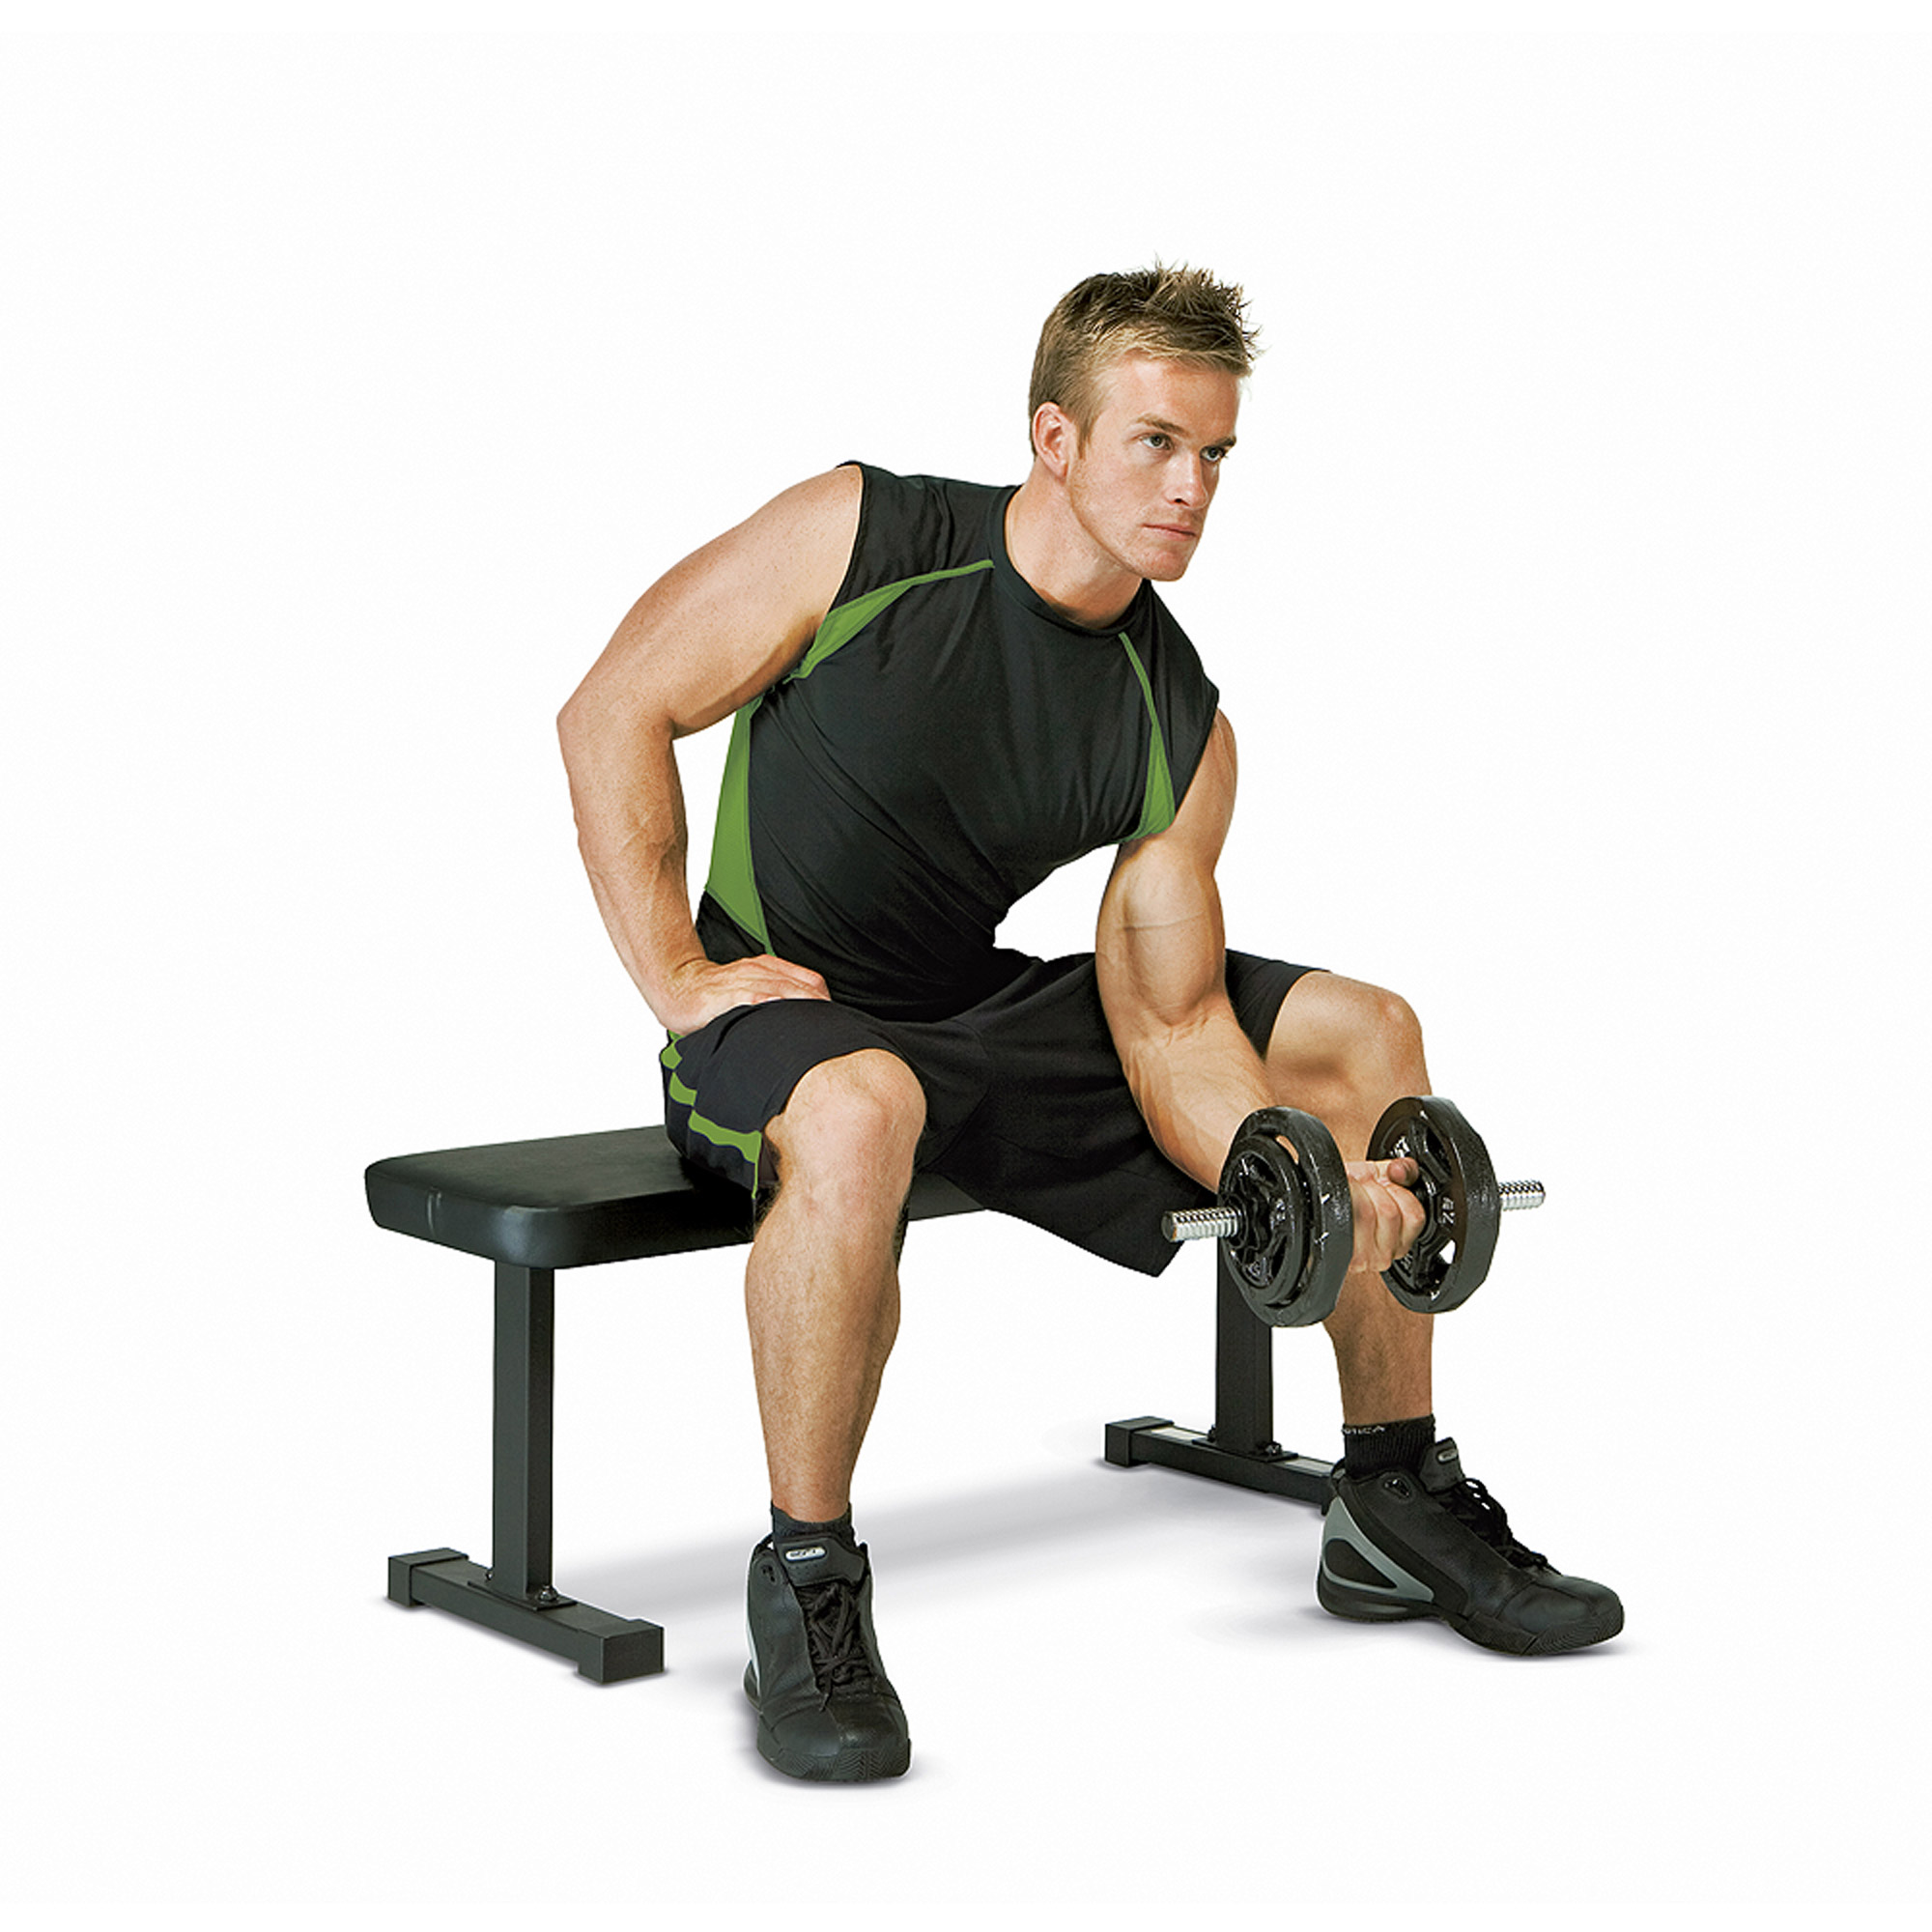 Body Vision 620 Weight Bench Manual Woodworkers